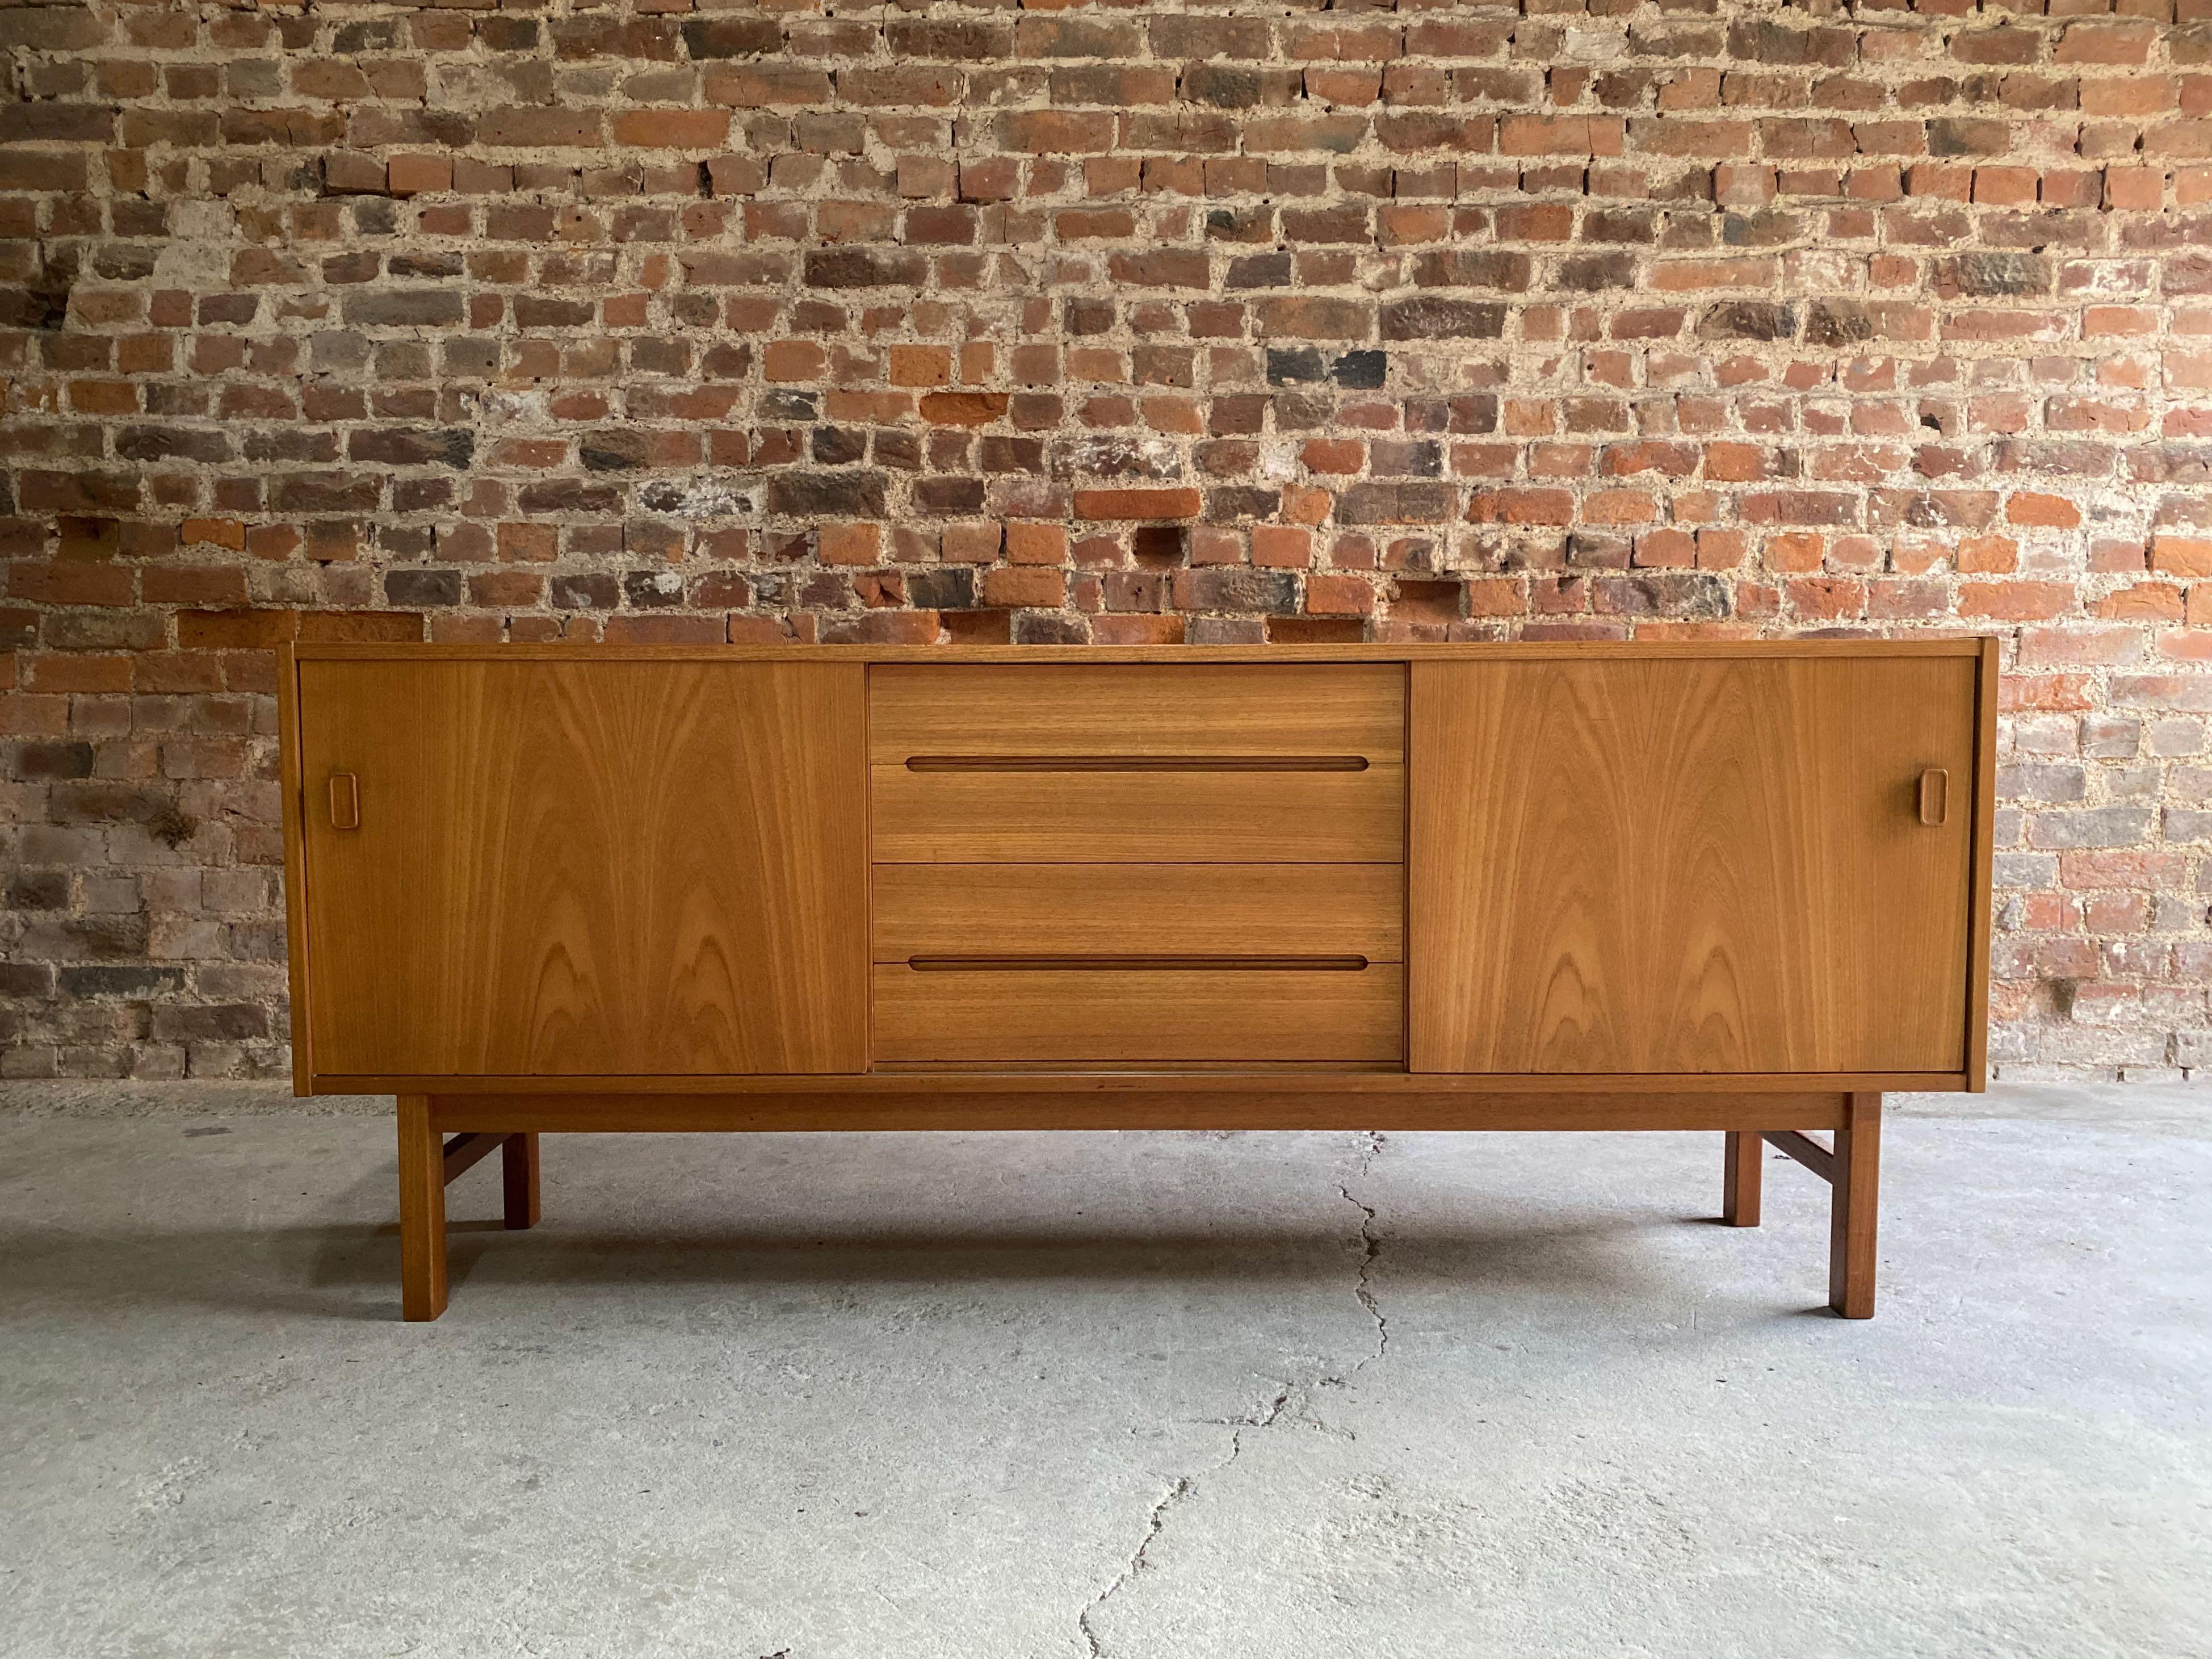 Nils Johnsson Arild Teak Sideboard for Troeds Bjärnum, Sweden, circa 1970

We are delighted to offer this Nils Johnsson teak sideboard model ‘Arild for Troeds Bjärnum, Sweden' circa 1970, the rectangular top over four central drawers with two